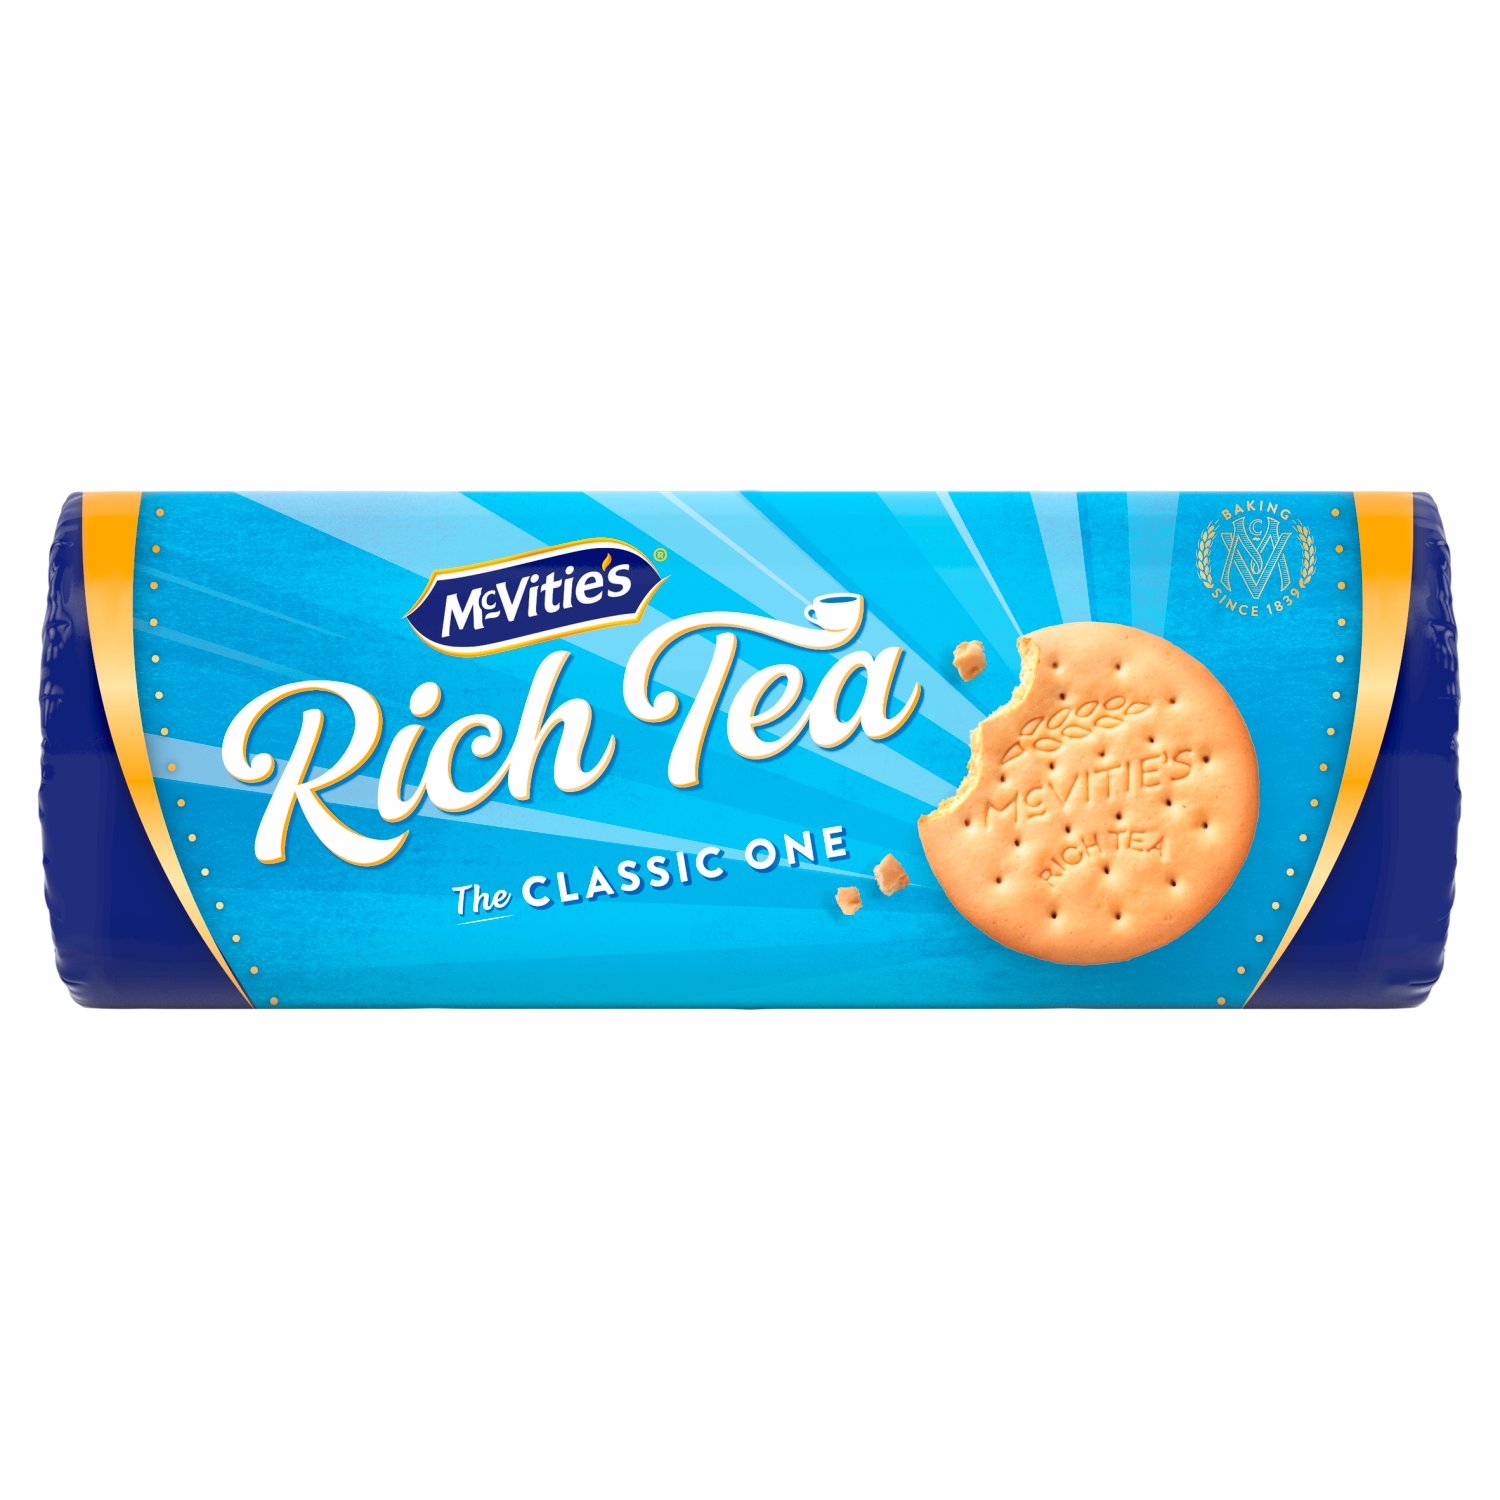 Crafted with care to create a light, crisp, sweet biscuit, McVitie's Rich Tea biscuits are a true British classic, and the gold standard for dunking in a cup of tea.

Enjoy a little break from the everyday, McVitie's biscuits are too good not to share.